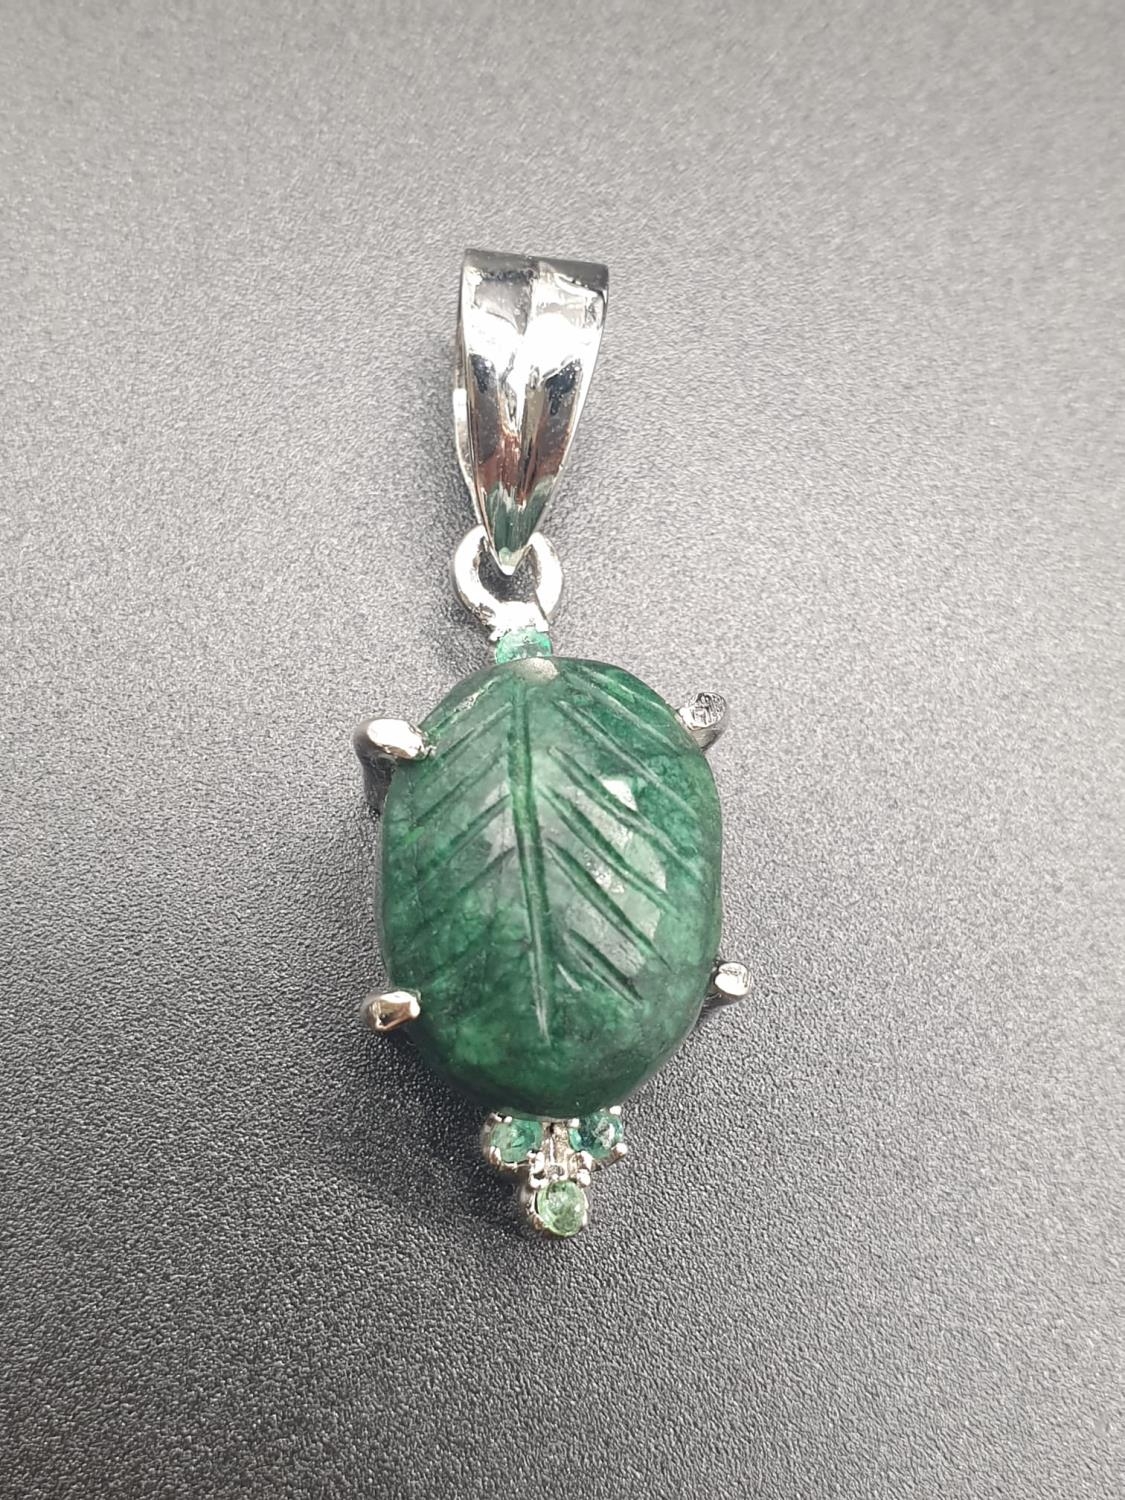 Carved Emerald Oval Pendant set In Sterling Silver, weight 10.65g and 5cm drop approx